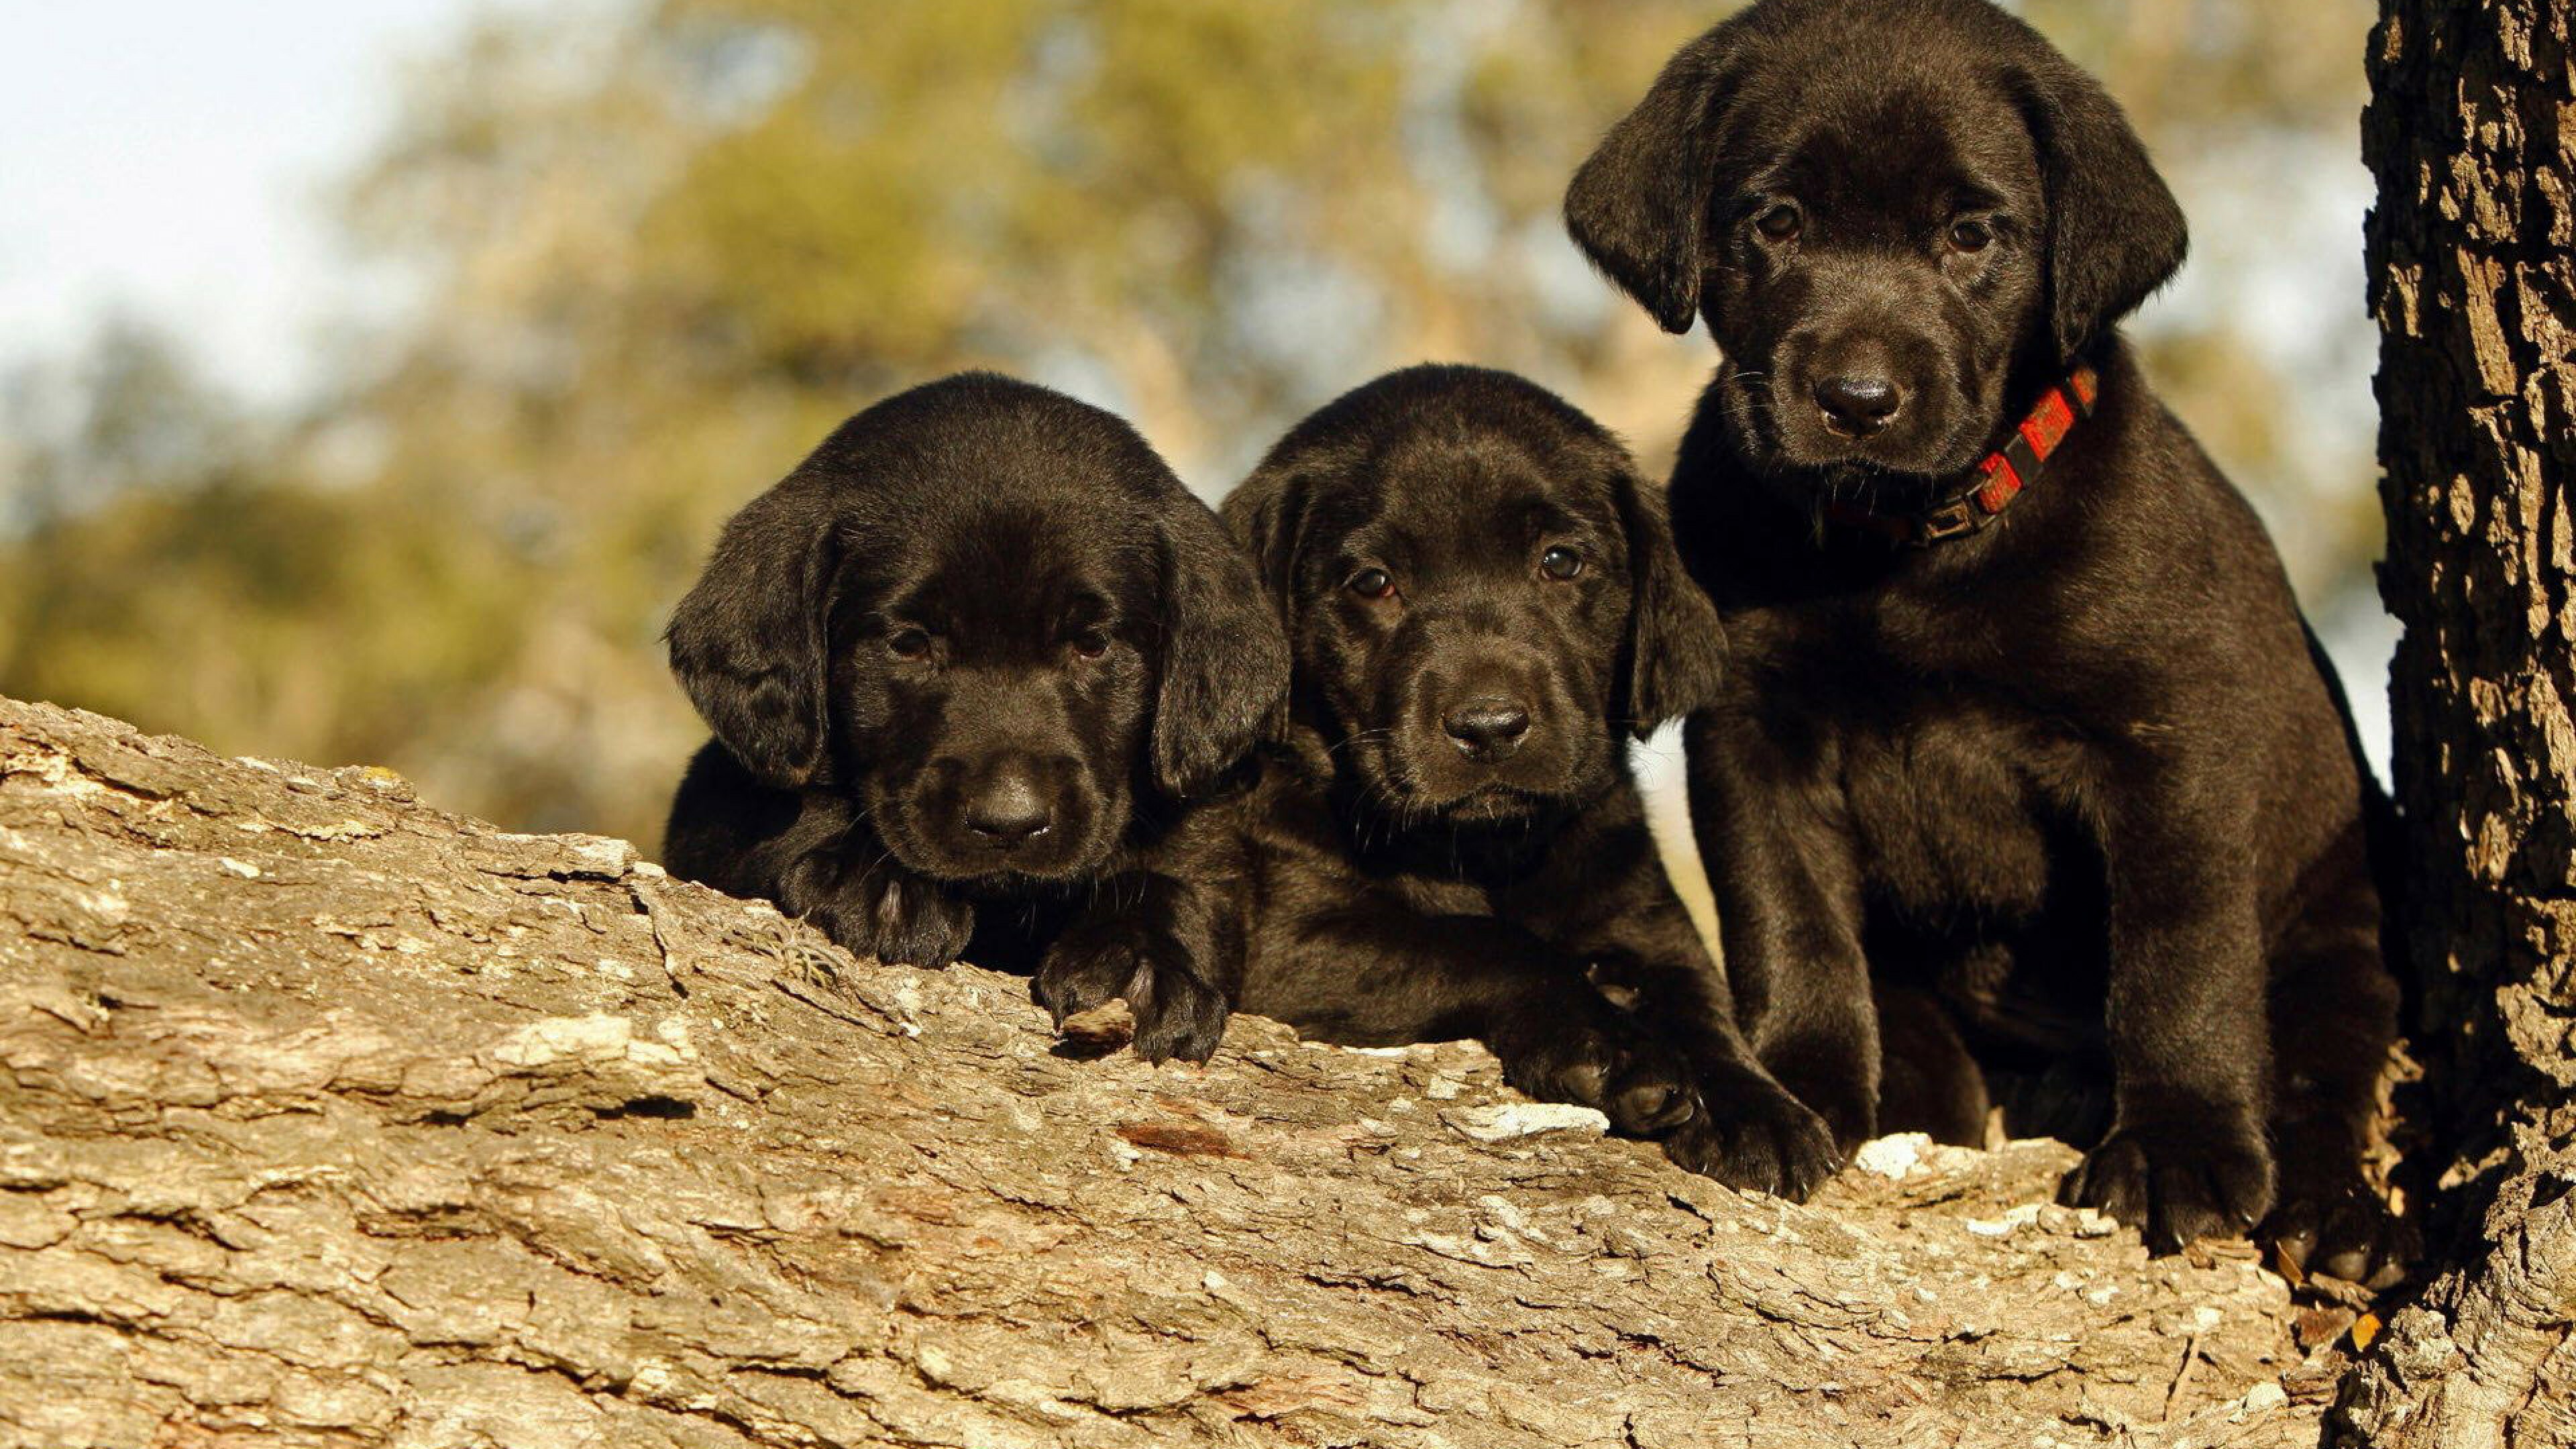 Labrador Retriever: Black puppies, Developed in the United Kingdom from fishing dogs. 3840x2160 4K Wallpaper.